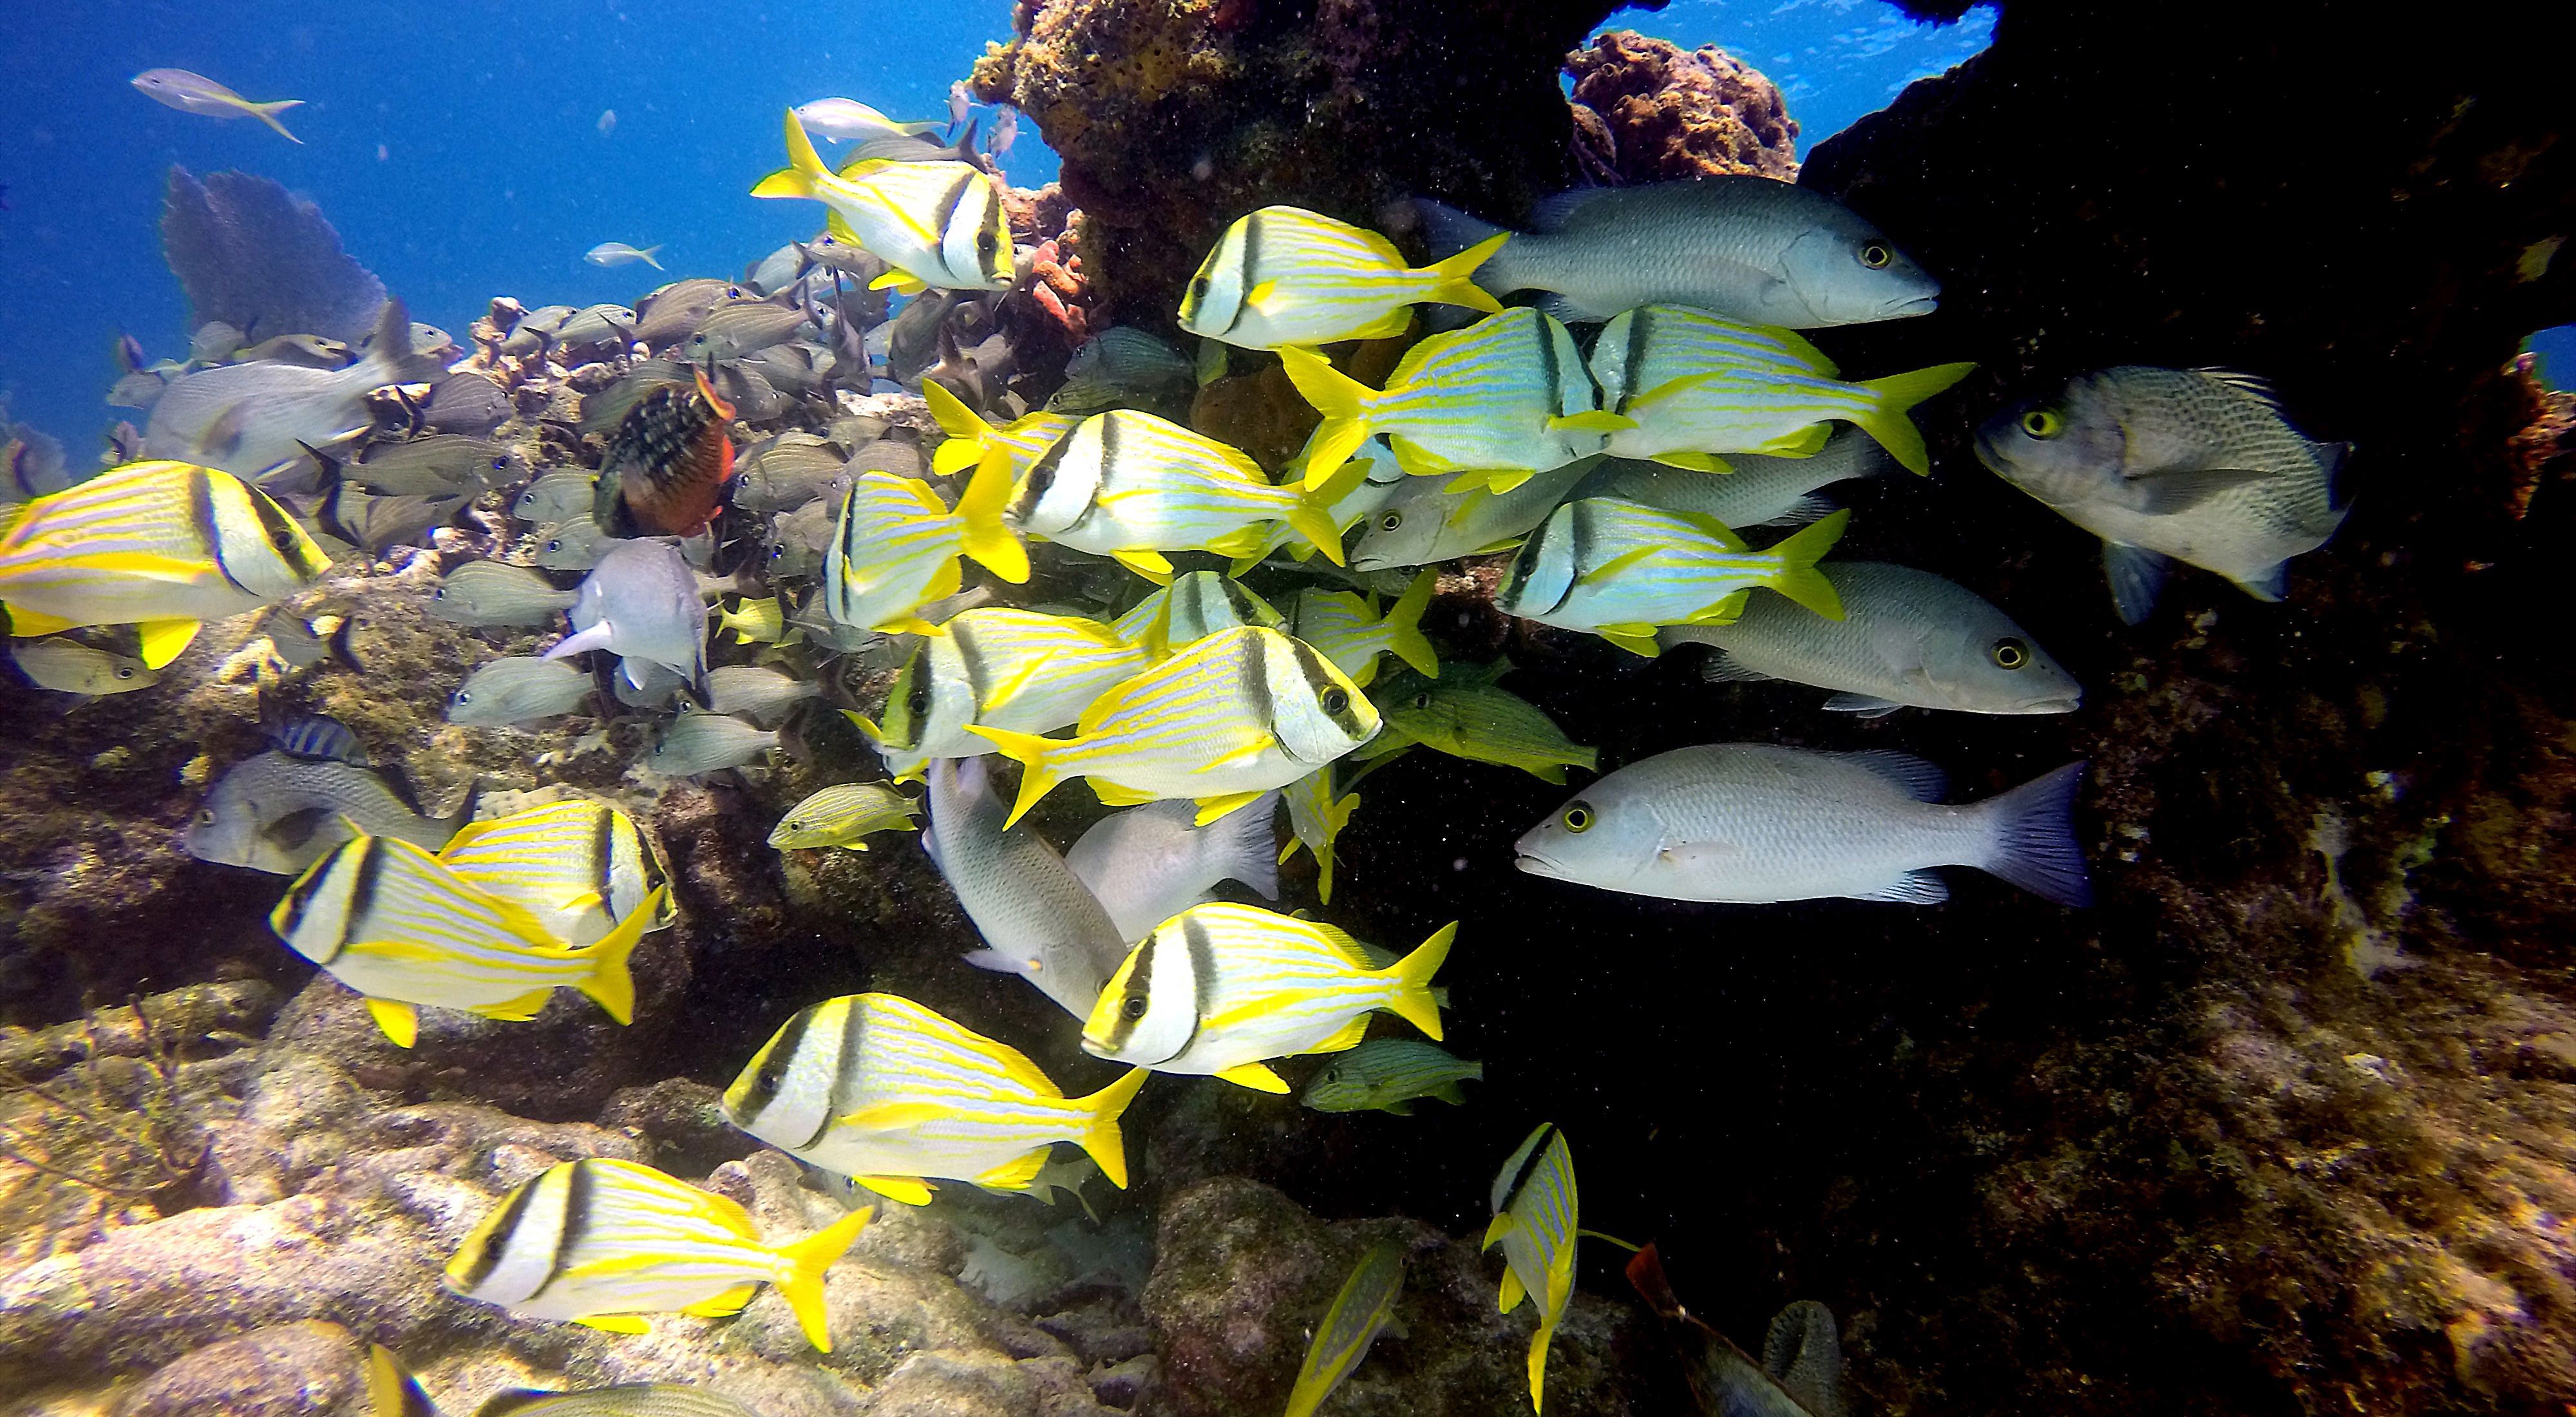 Closeup of schools of different types of fish, including bright yellow striped fish and larger gray fish, swimming in a coral reef.